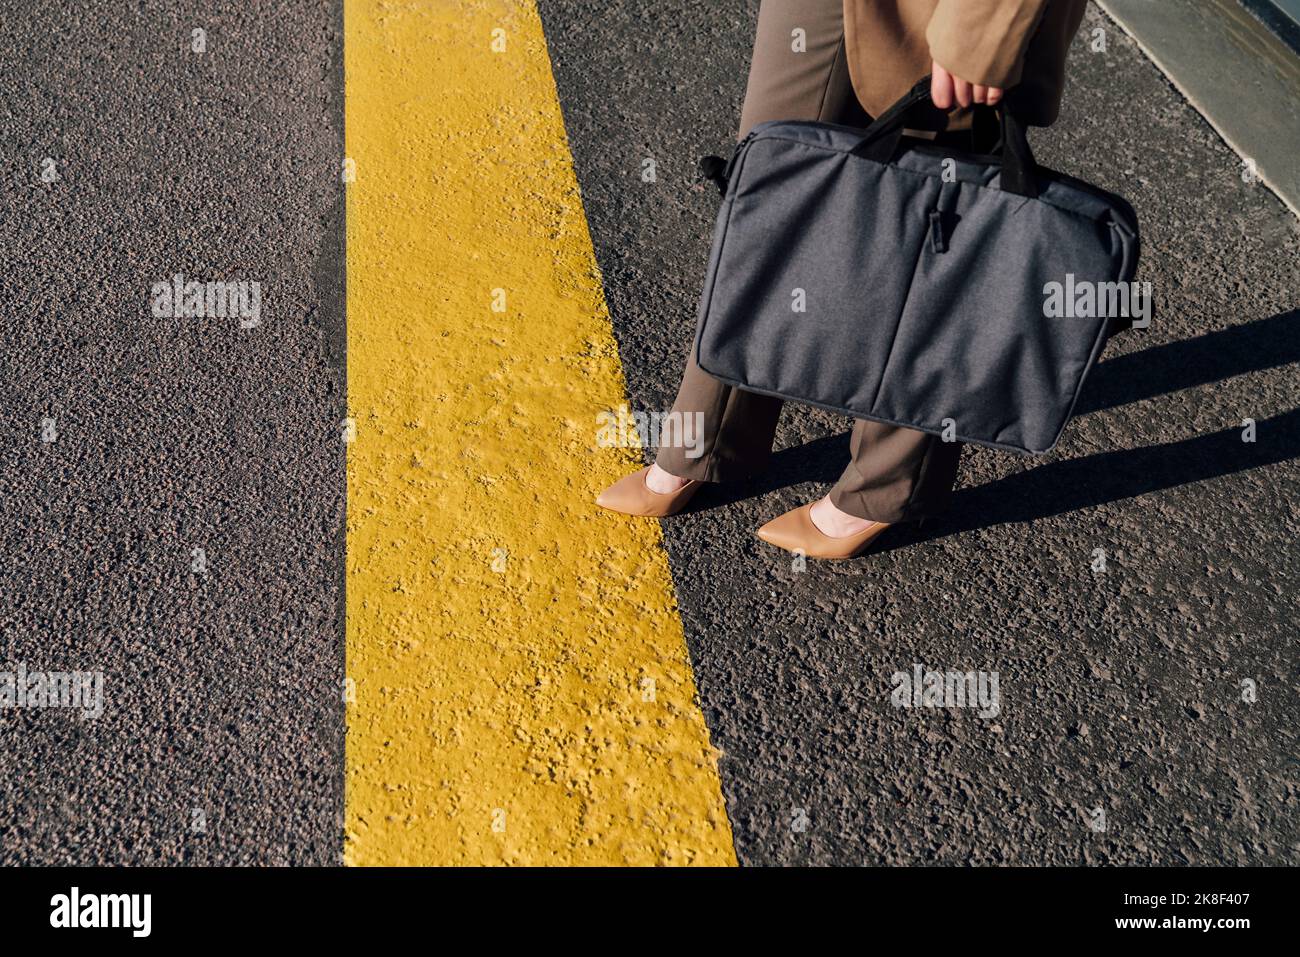 Businesswoman with laptop bag standing by yellow line on road Stock Photo